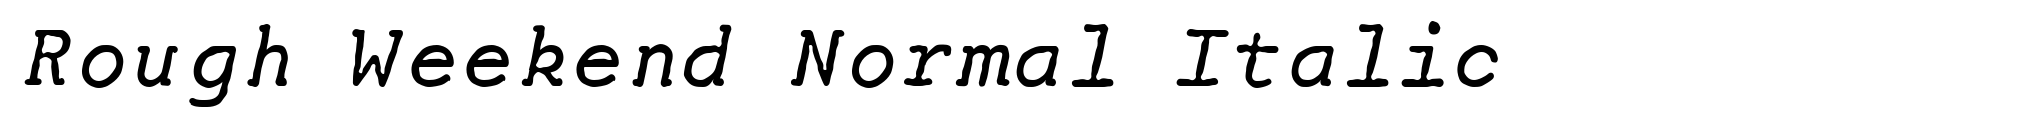 Rough Weekend Normal Italic image